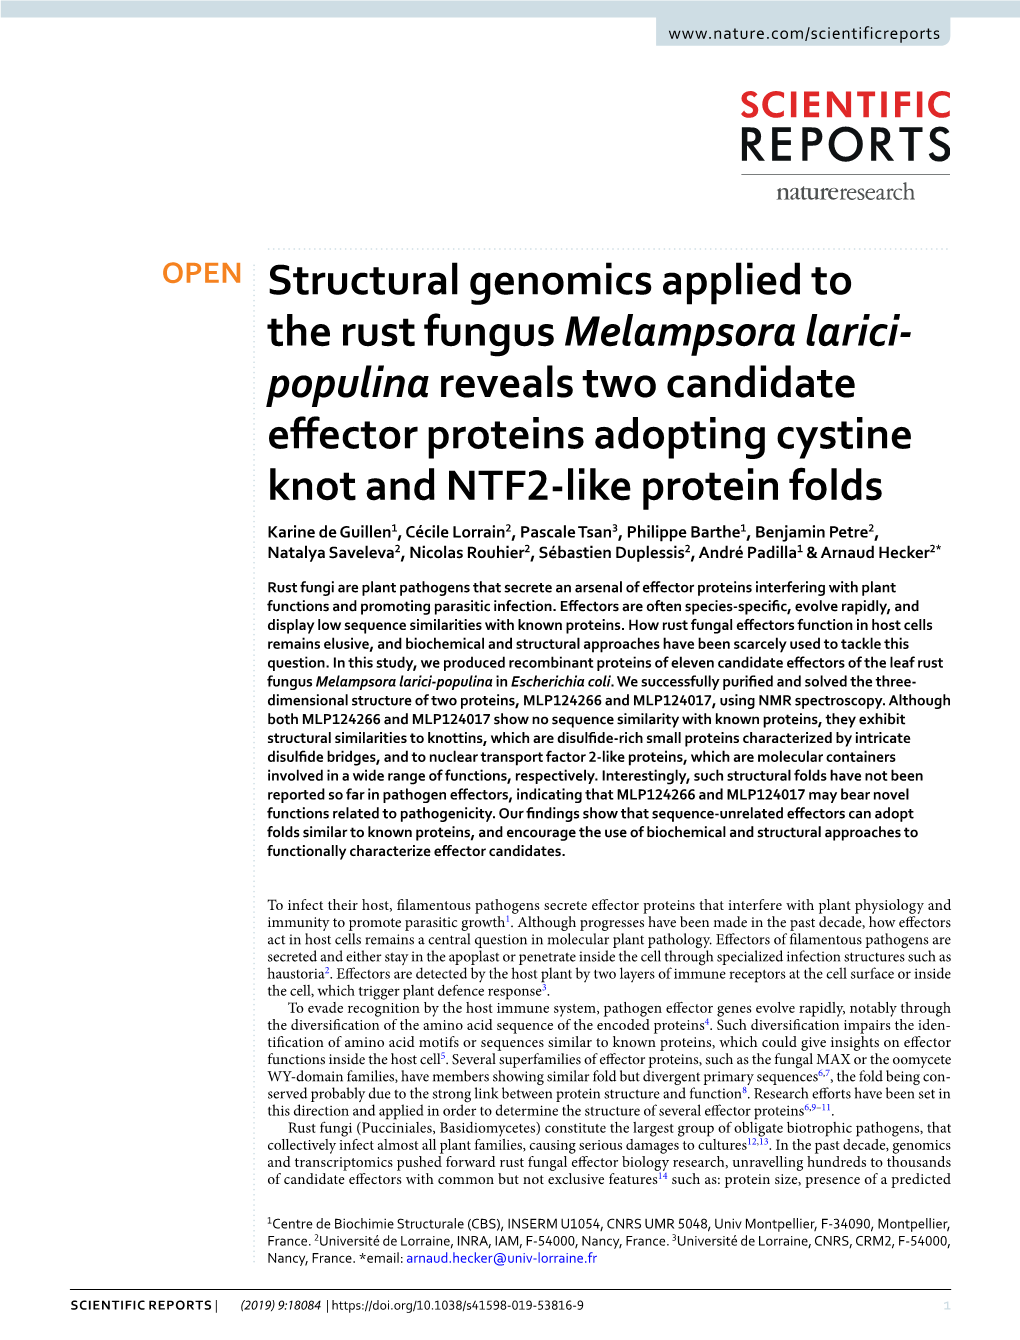 Structural Genomics Applied to the Rust Fungus Melampsora Larici-Populina